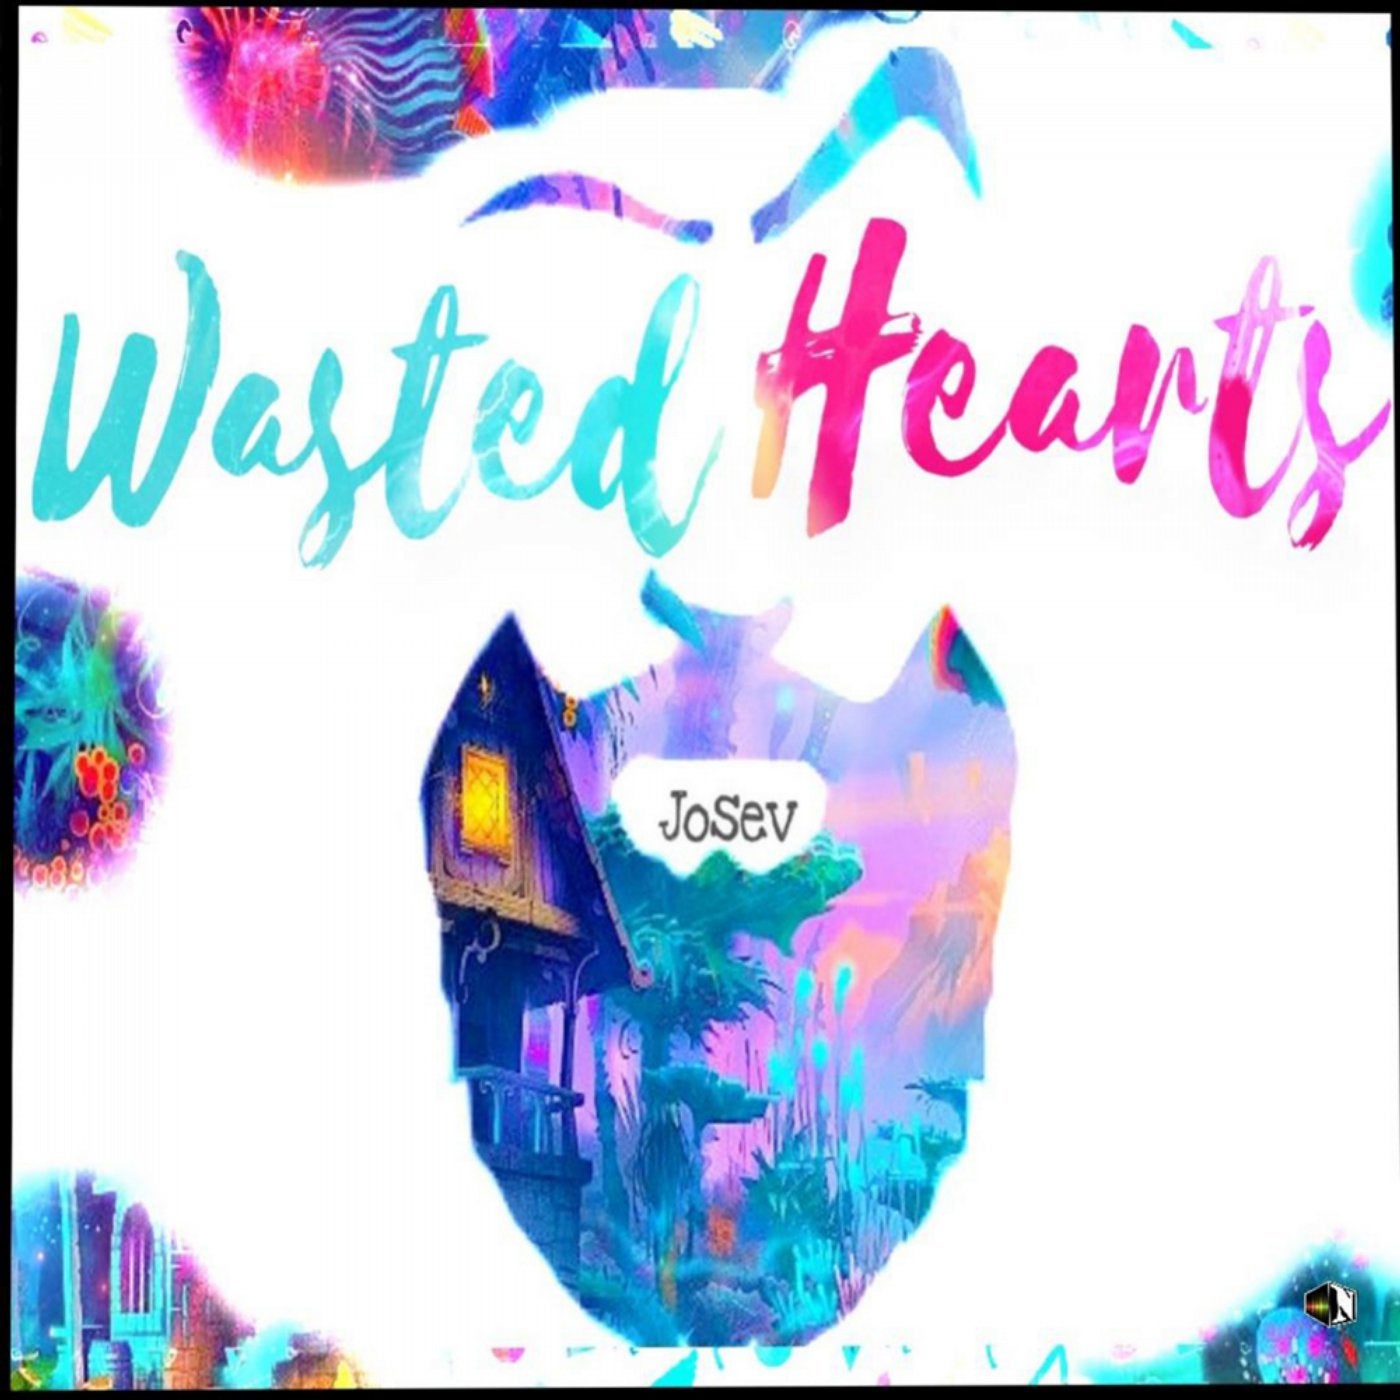 Wasted Hearts